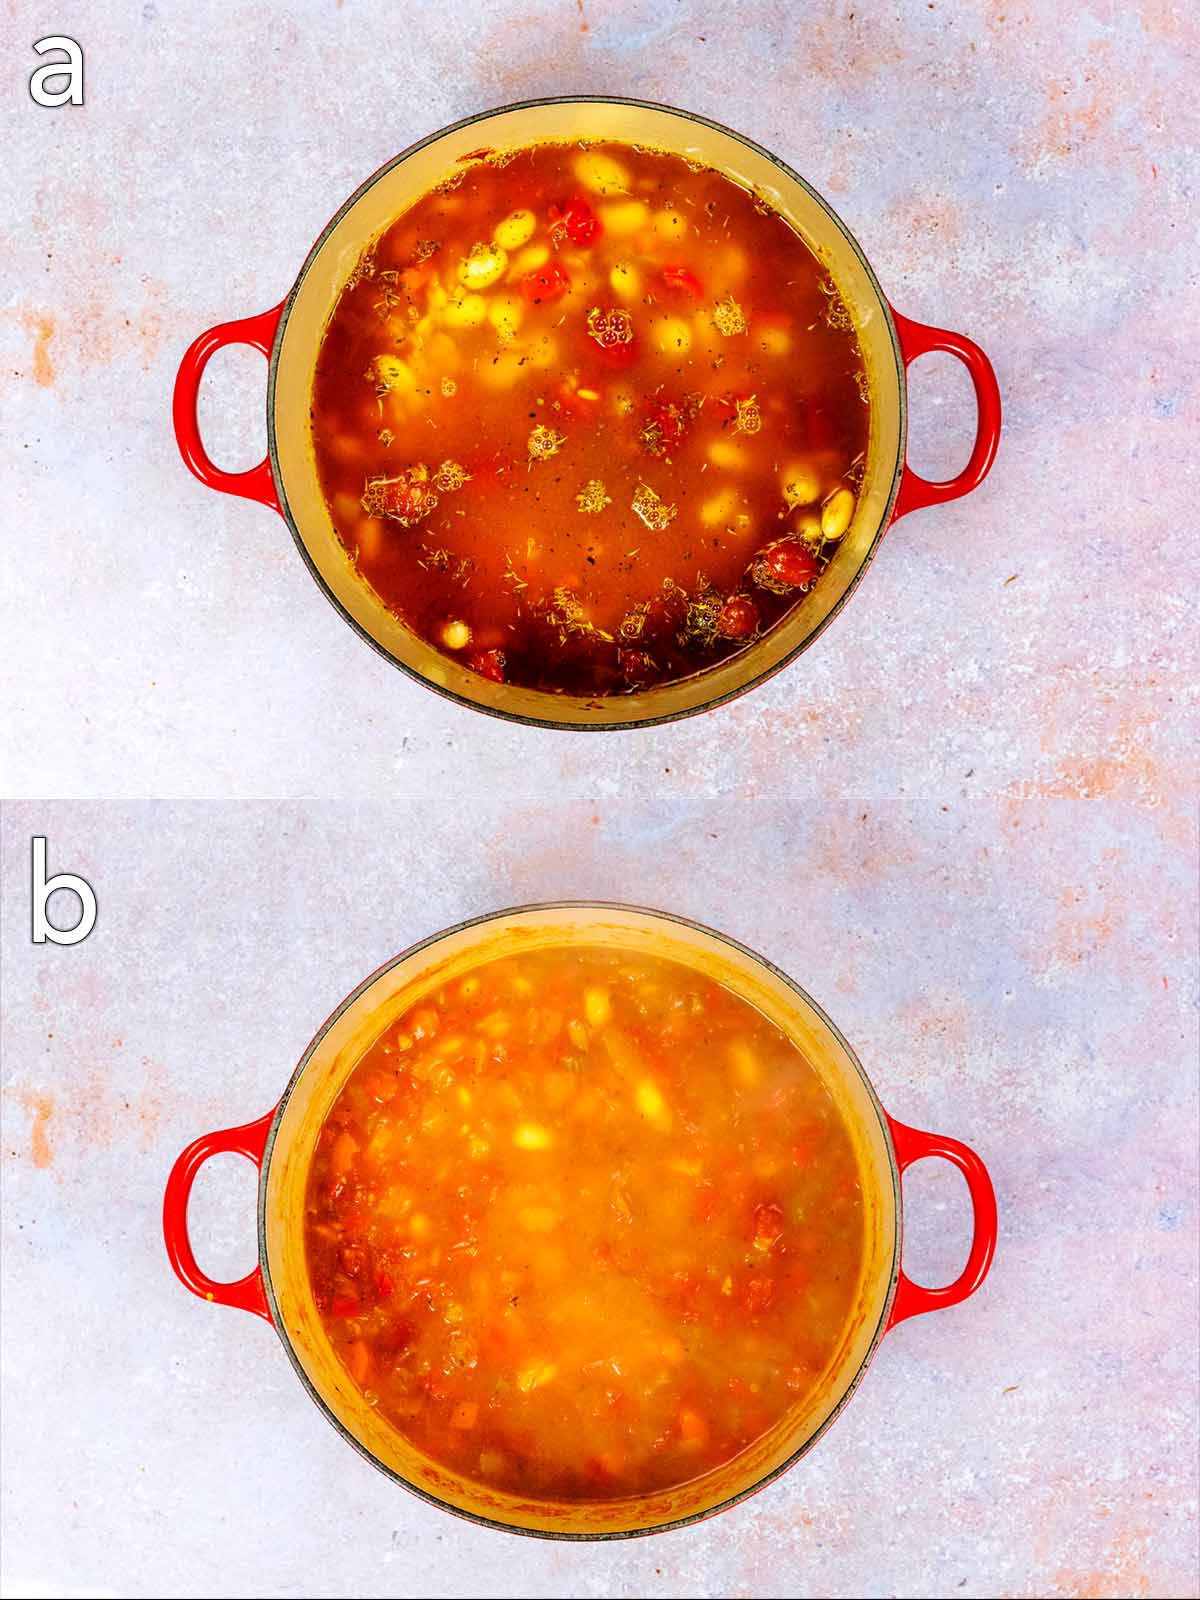 Stock added to the pan. Before and after of mixing and cooking.